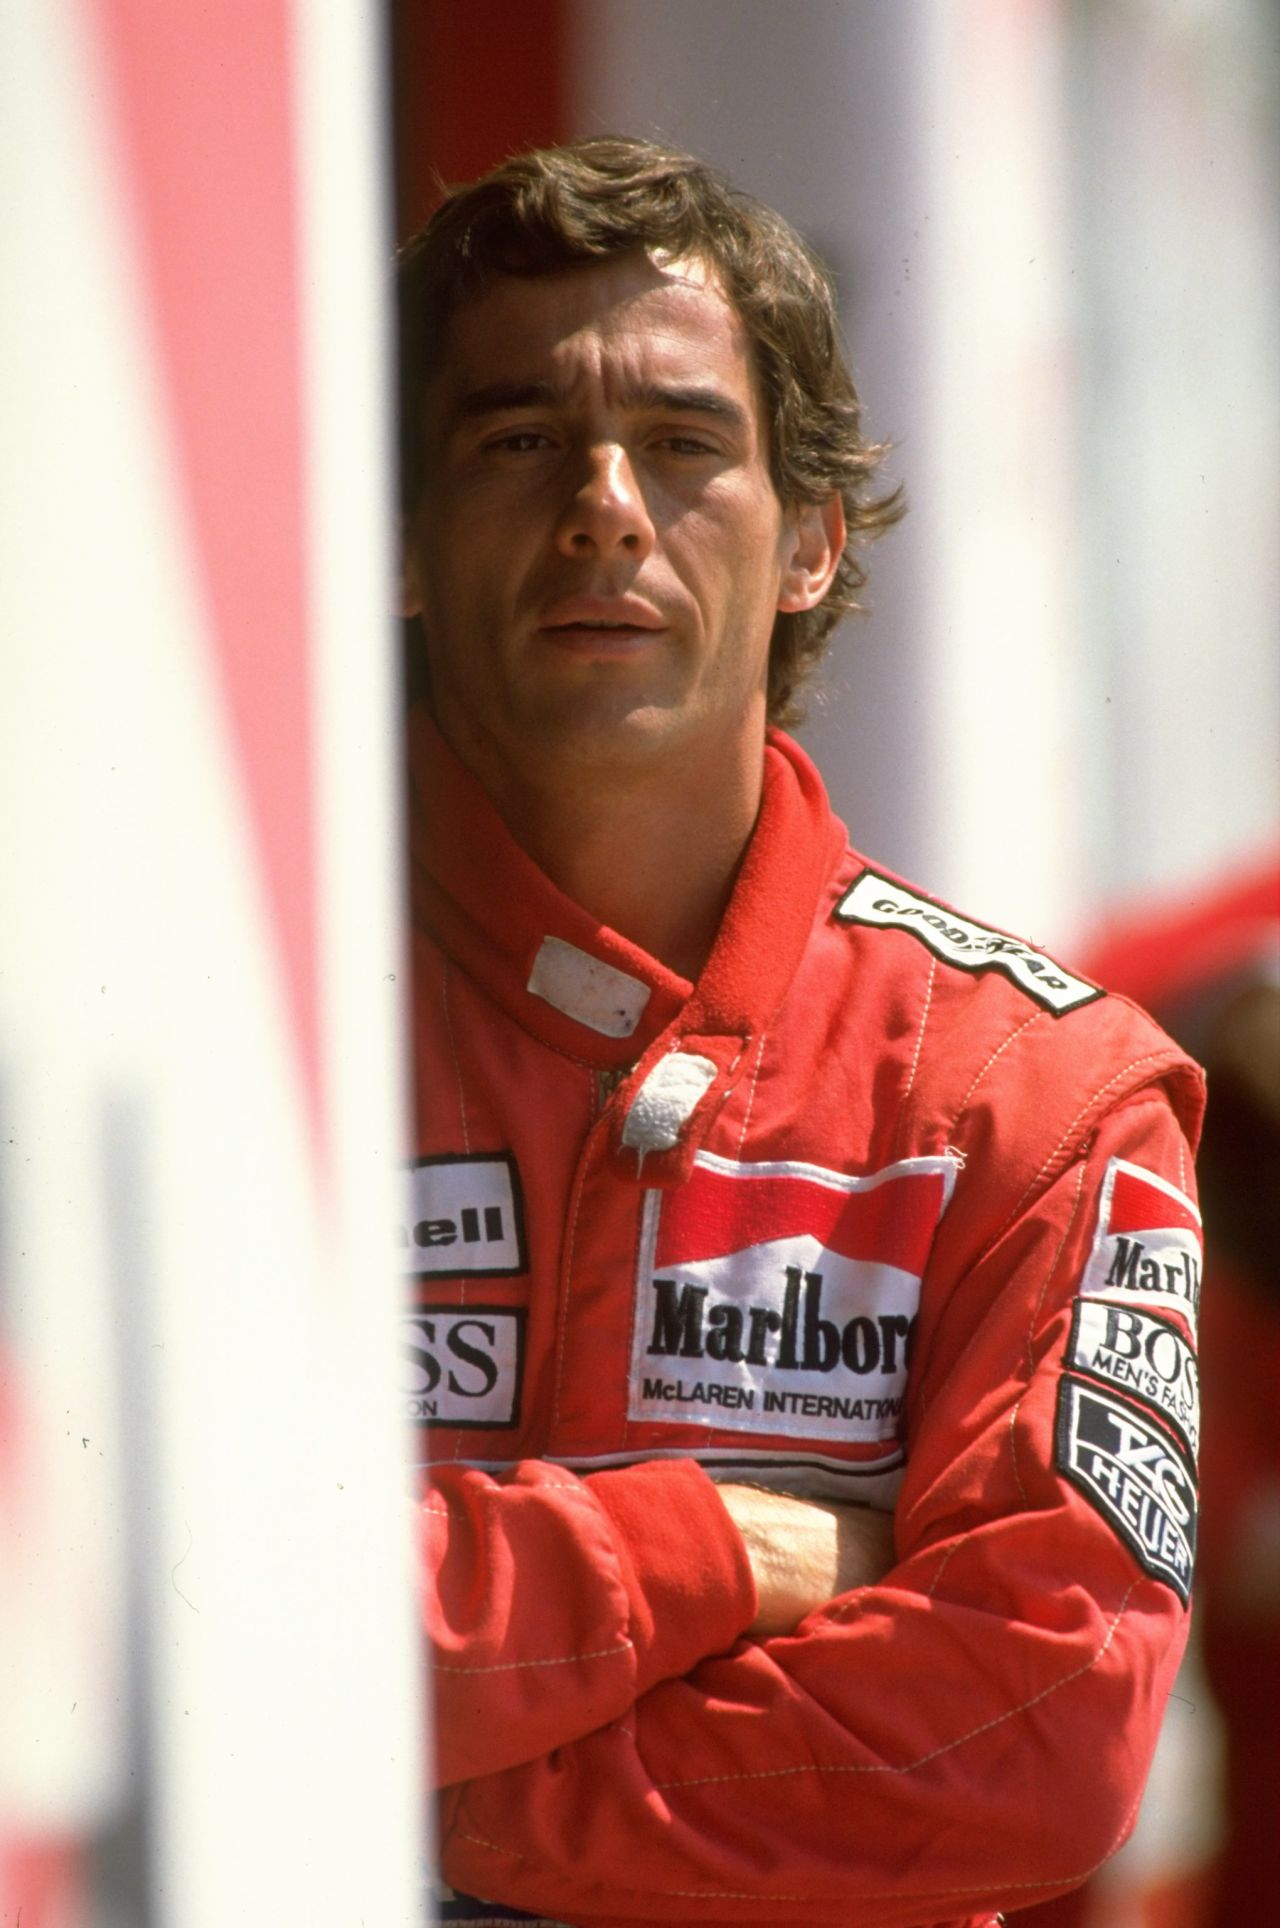 Legendary Brazilian driver Ayrton Senna was a huge fan of go-karting, right up until his tragic death in a crash at the San Marino Grand Prix in 1994. The three-time F1 champion still raced karts right up until his death, according to Webber.